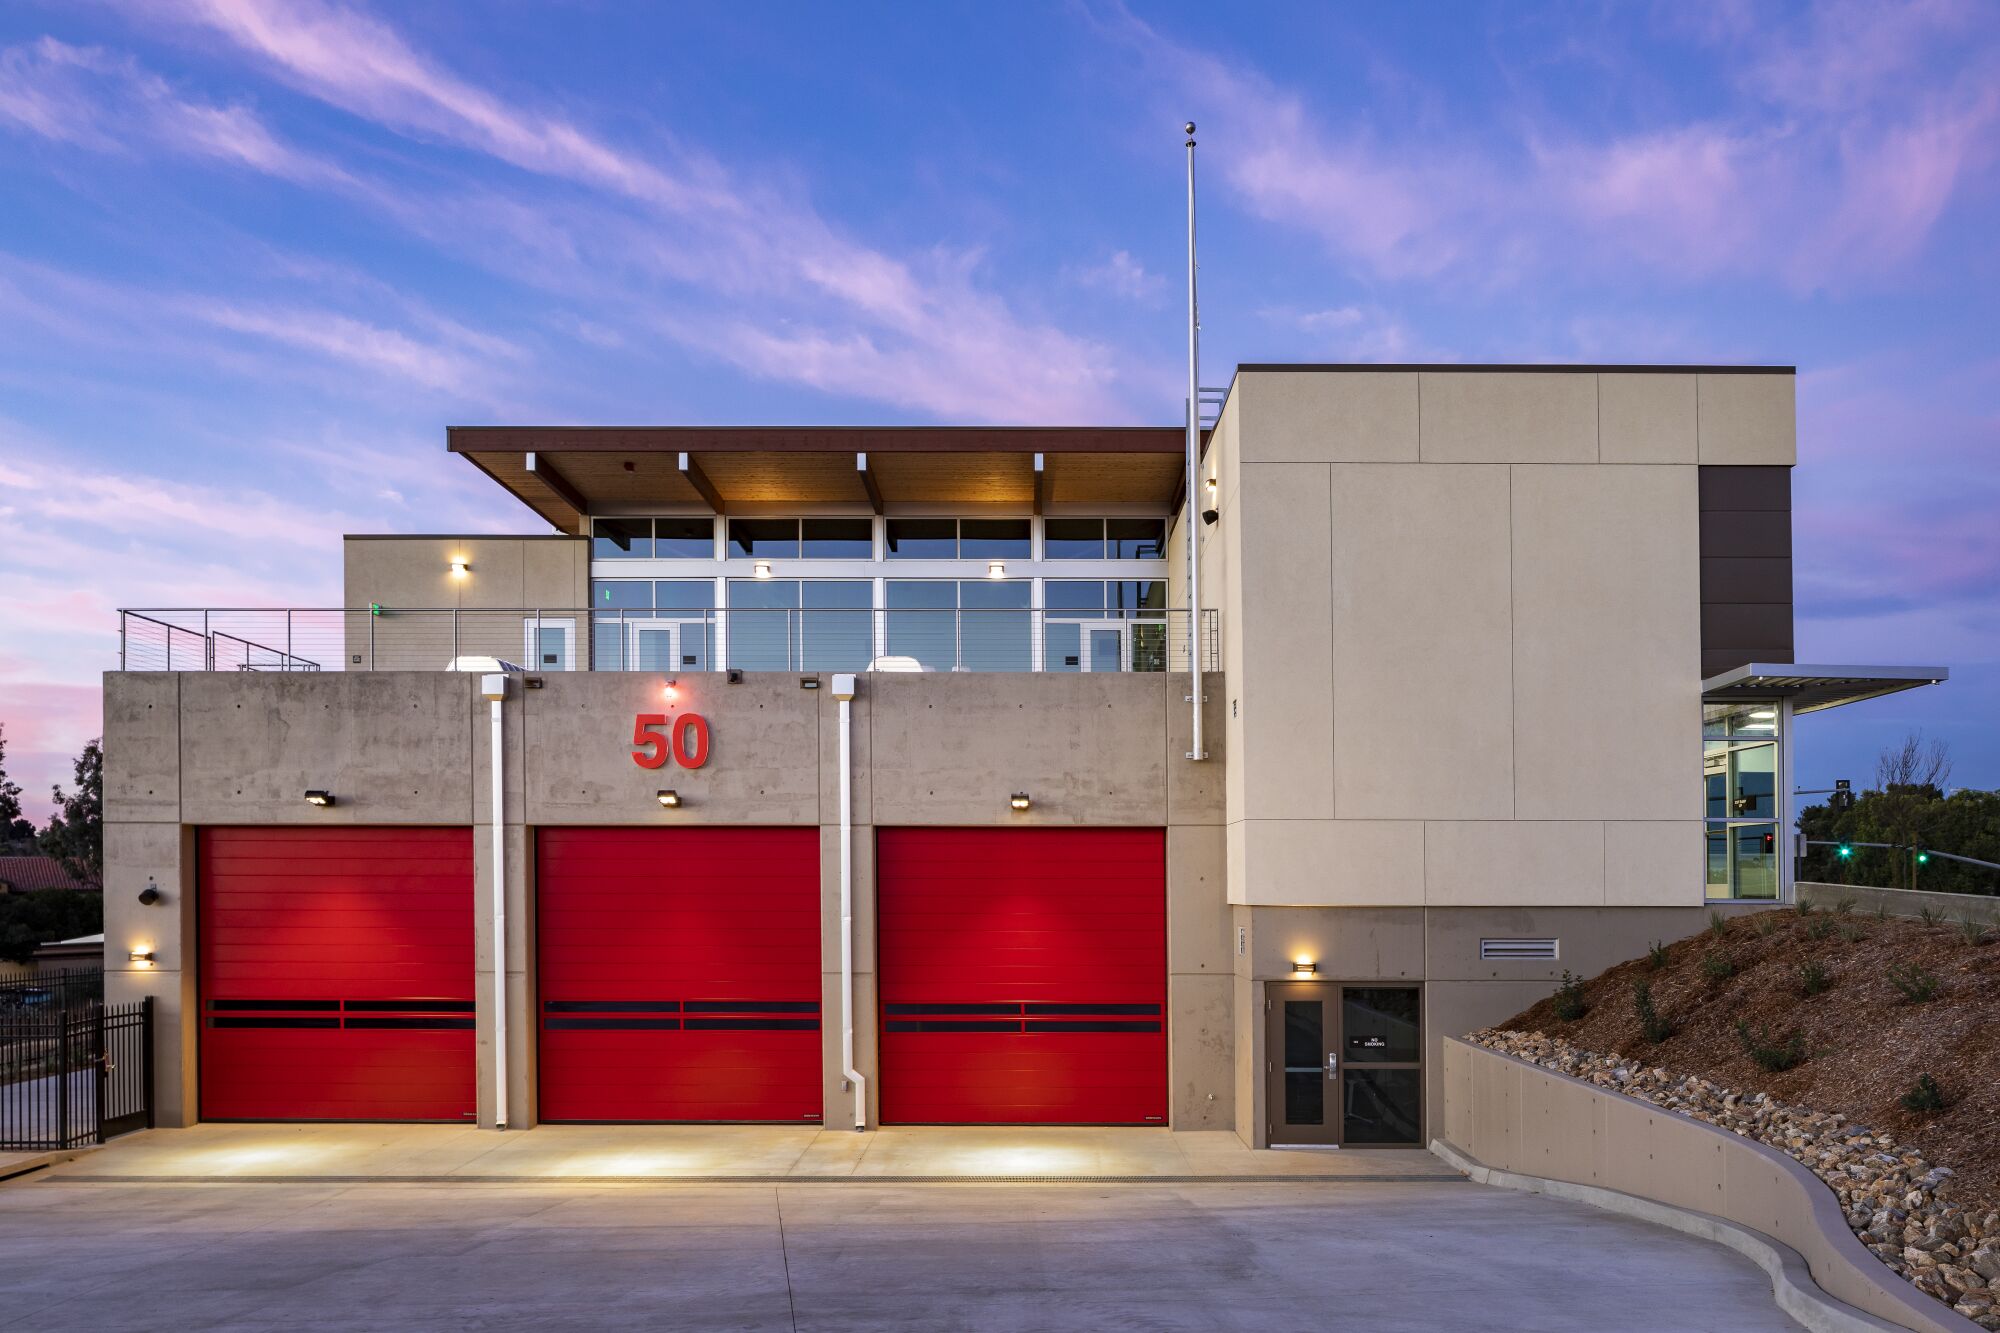 2021 Orchids & Onions: Architecture – Orchid winner San Diego Fire Station 50